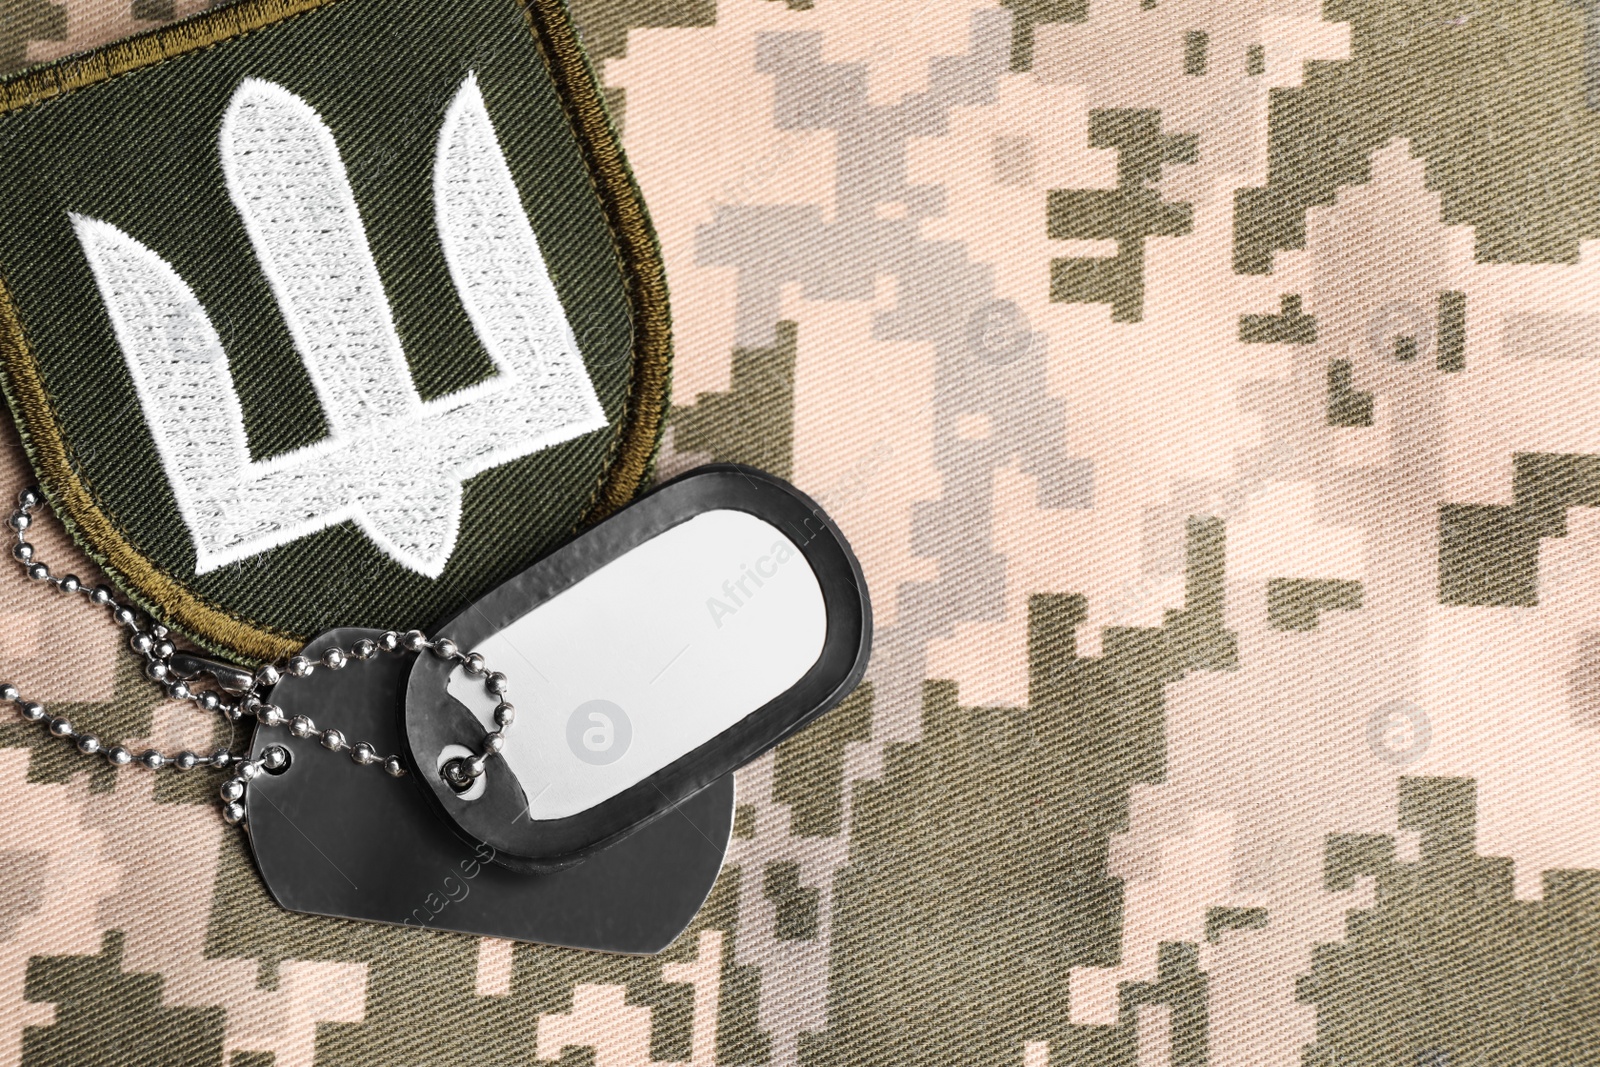 Photo of Military patch and ID tags on pixel Ukrainian camouflage, flat lay. Space for text